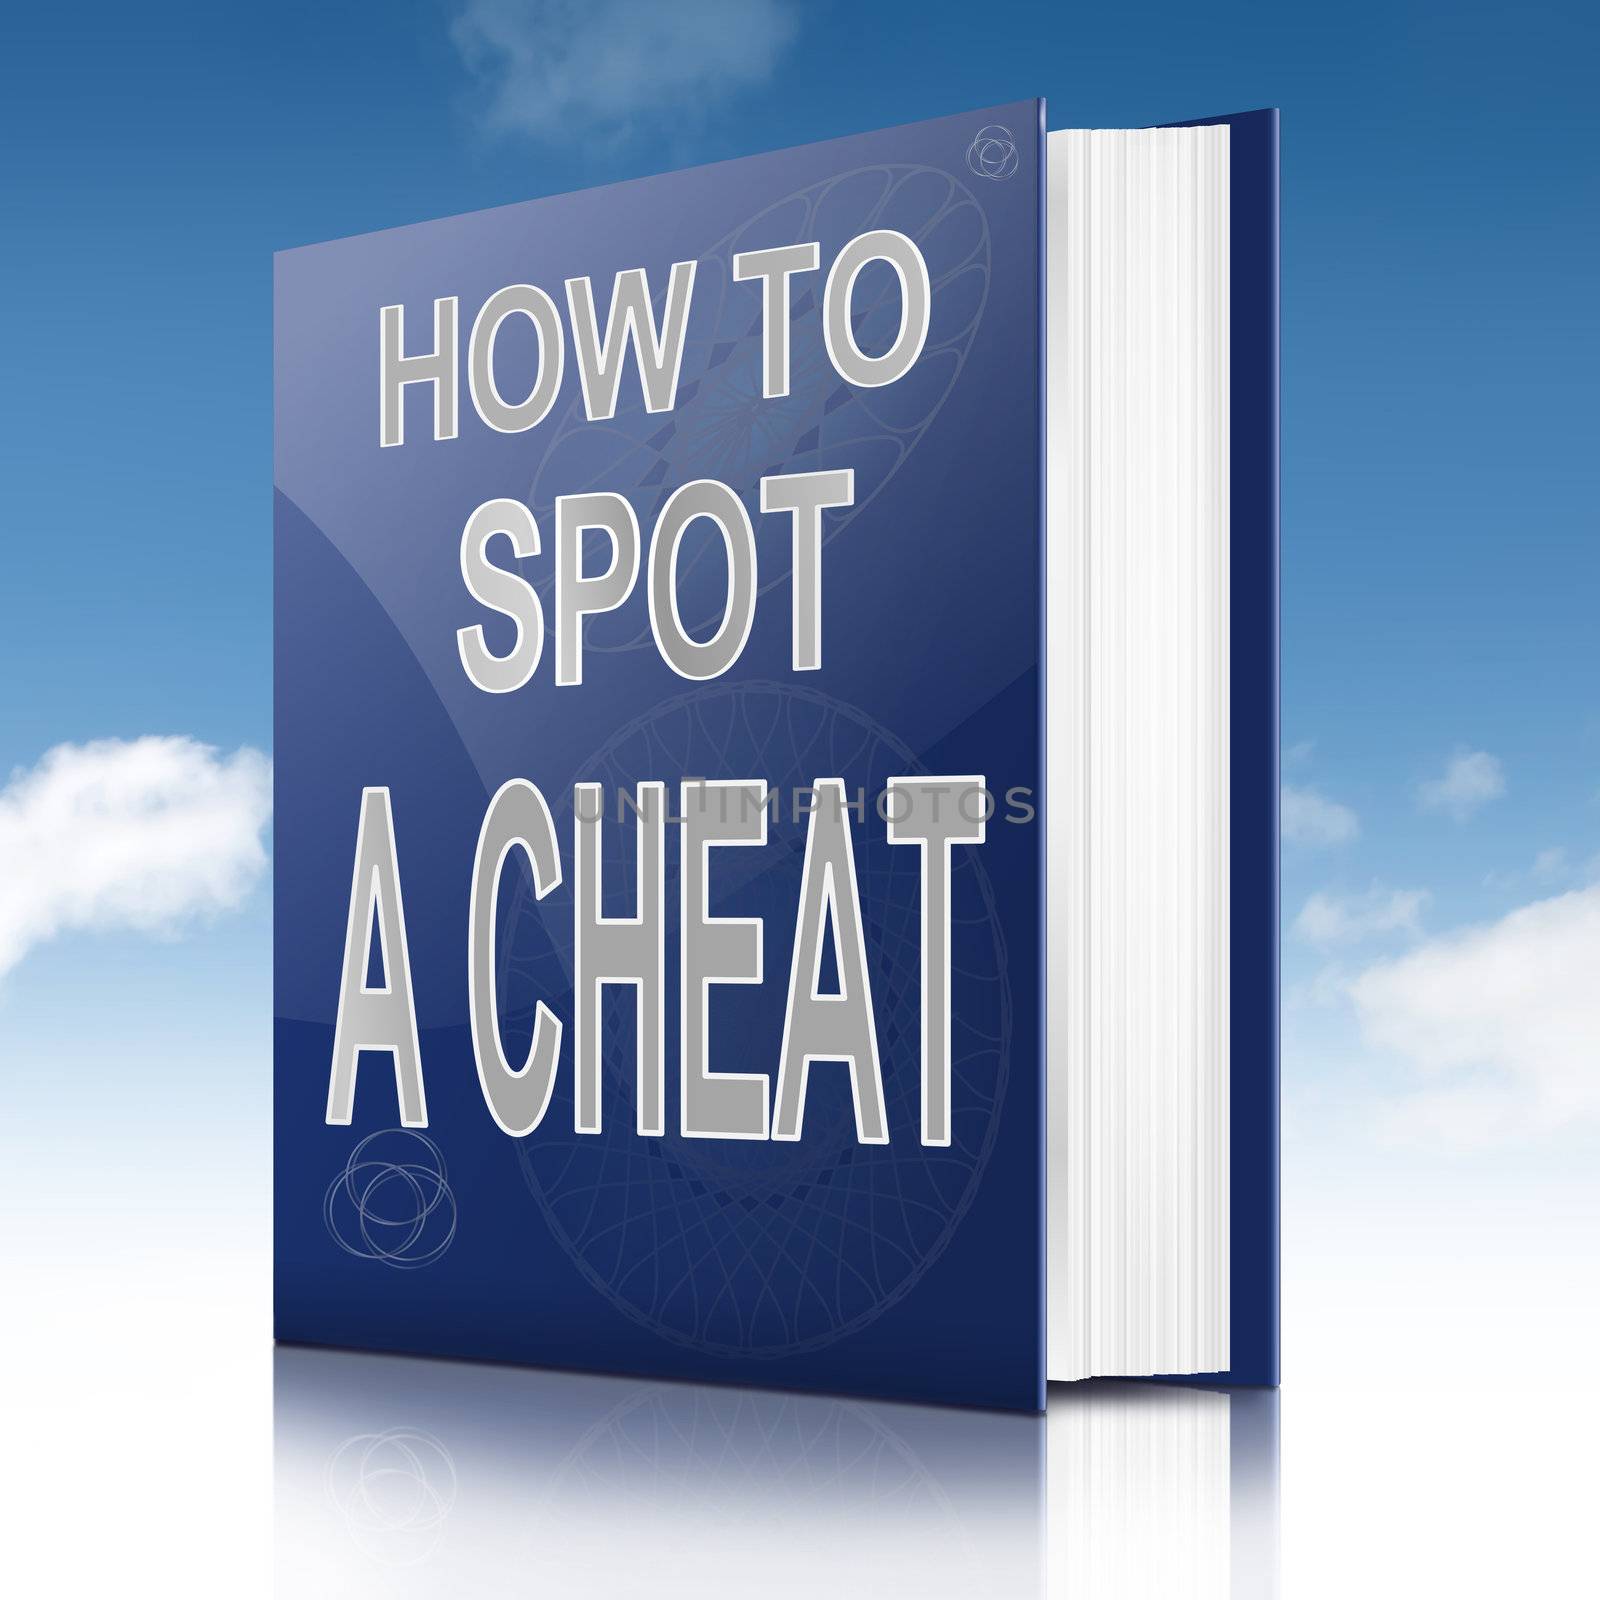 Illustration depicting a text book with a cheating concept title. Sky background.